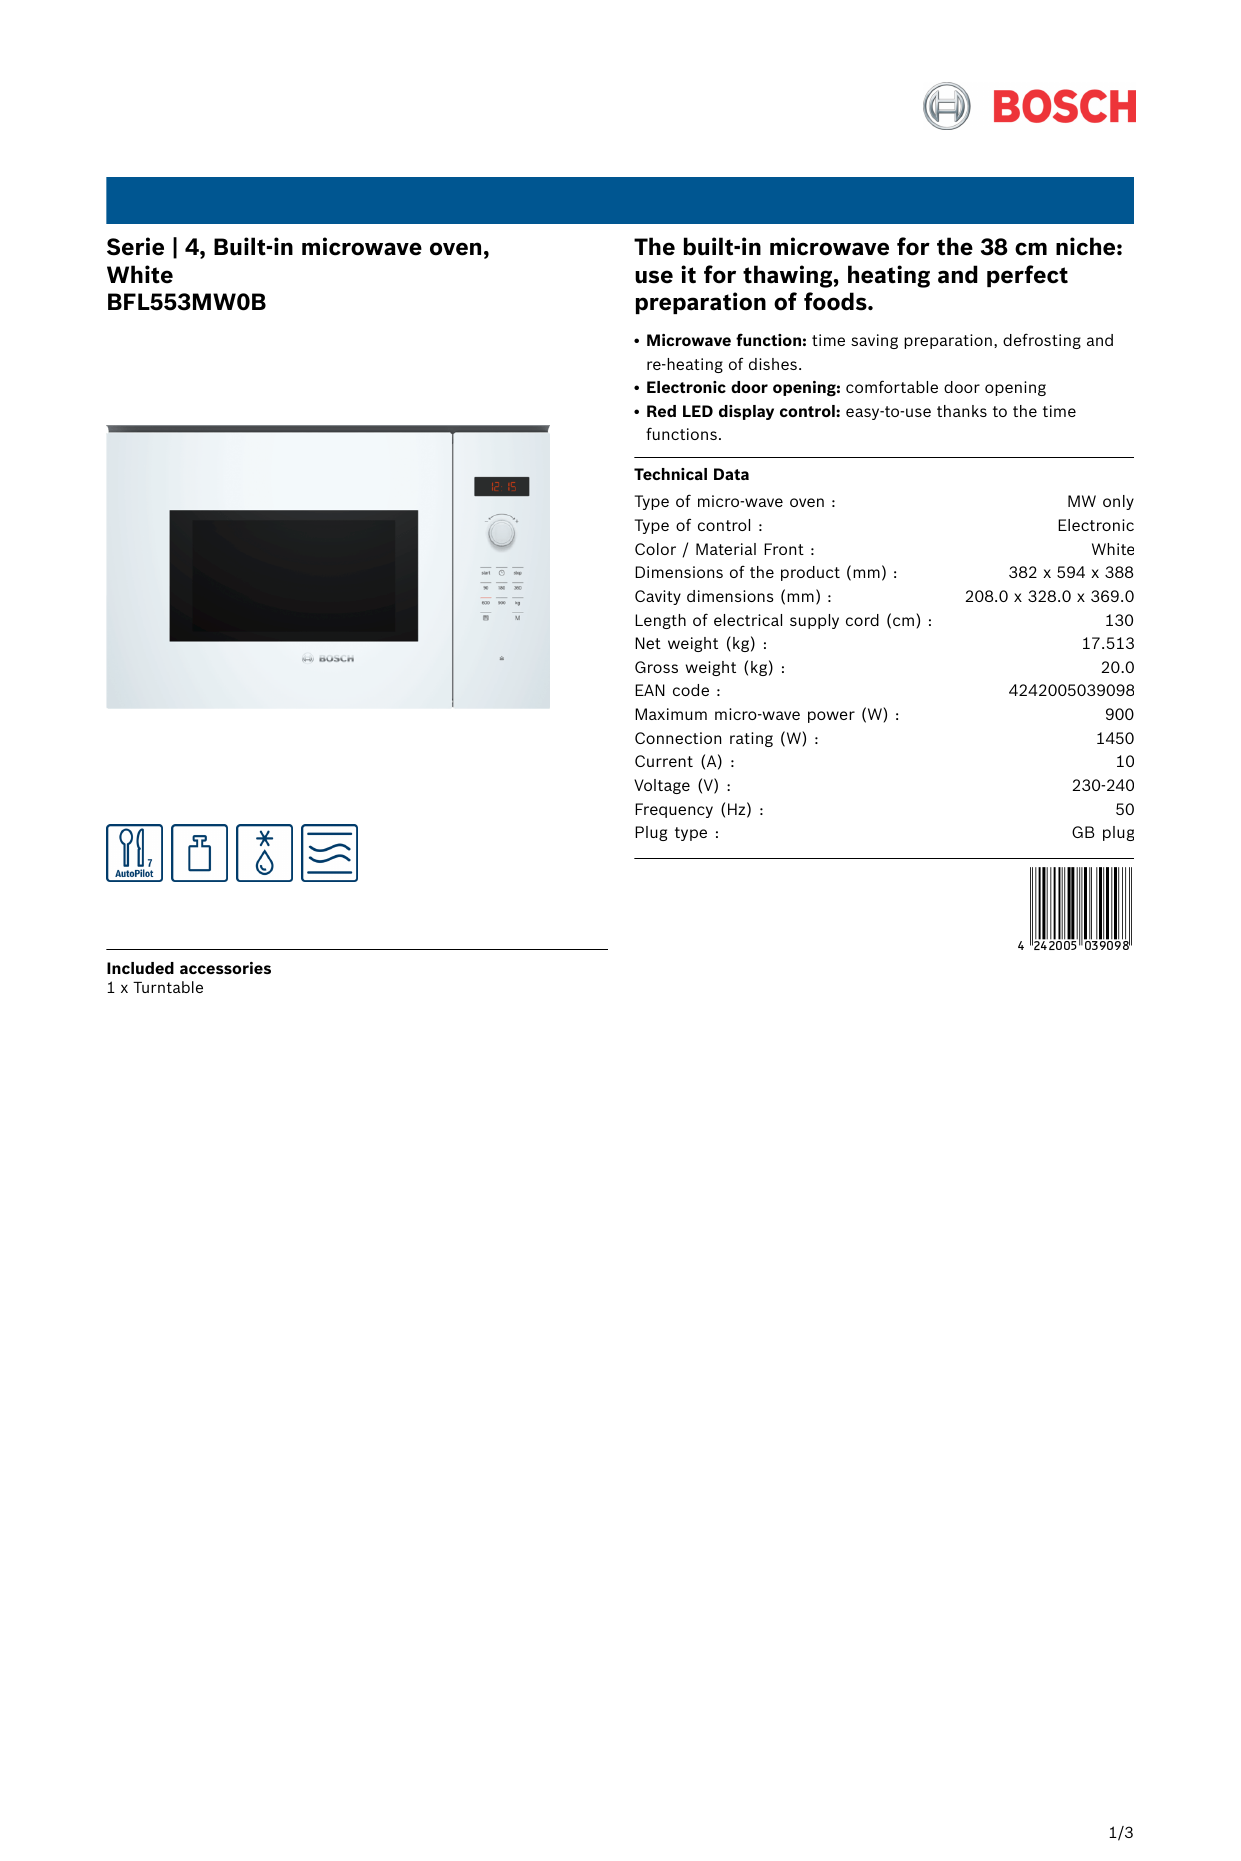 Bosch Bfl553mw0b White Built In Microwave Oven Serie 4 User